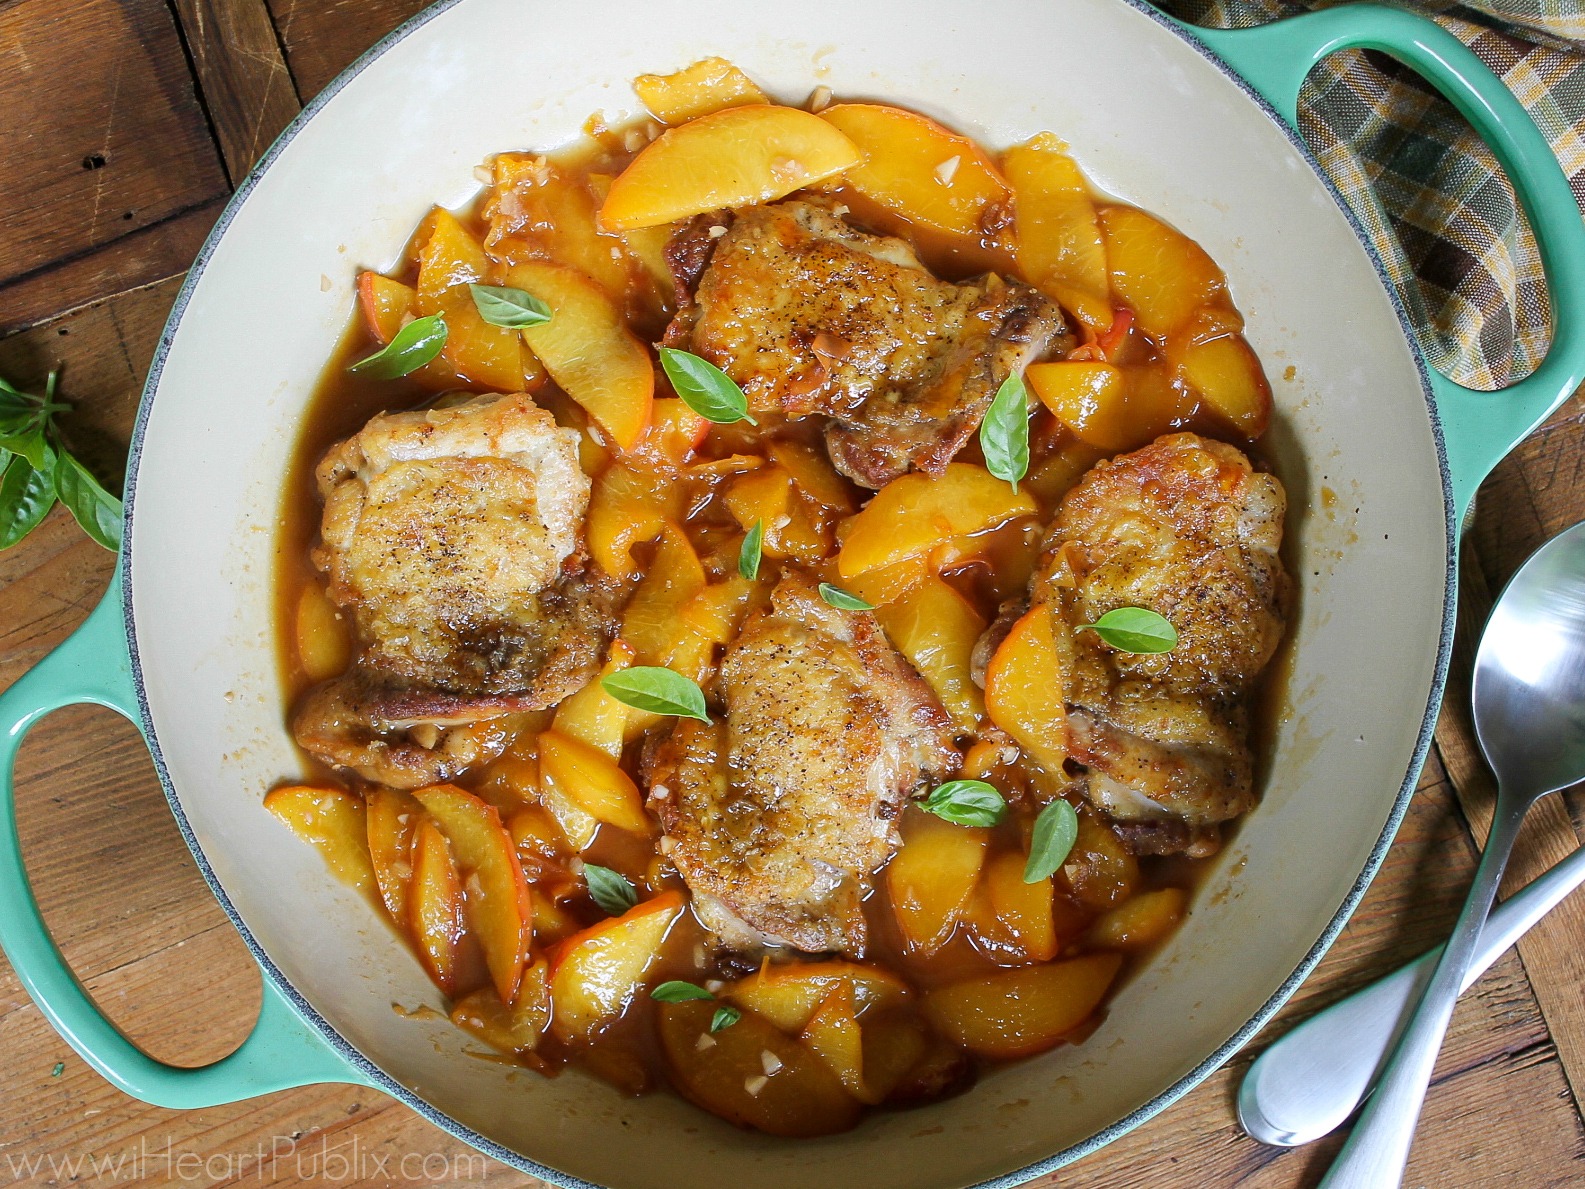 Sticky Peach Chicken – Super Meal To Go With The Sales At Publix